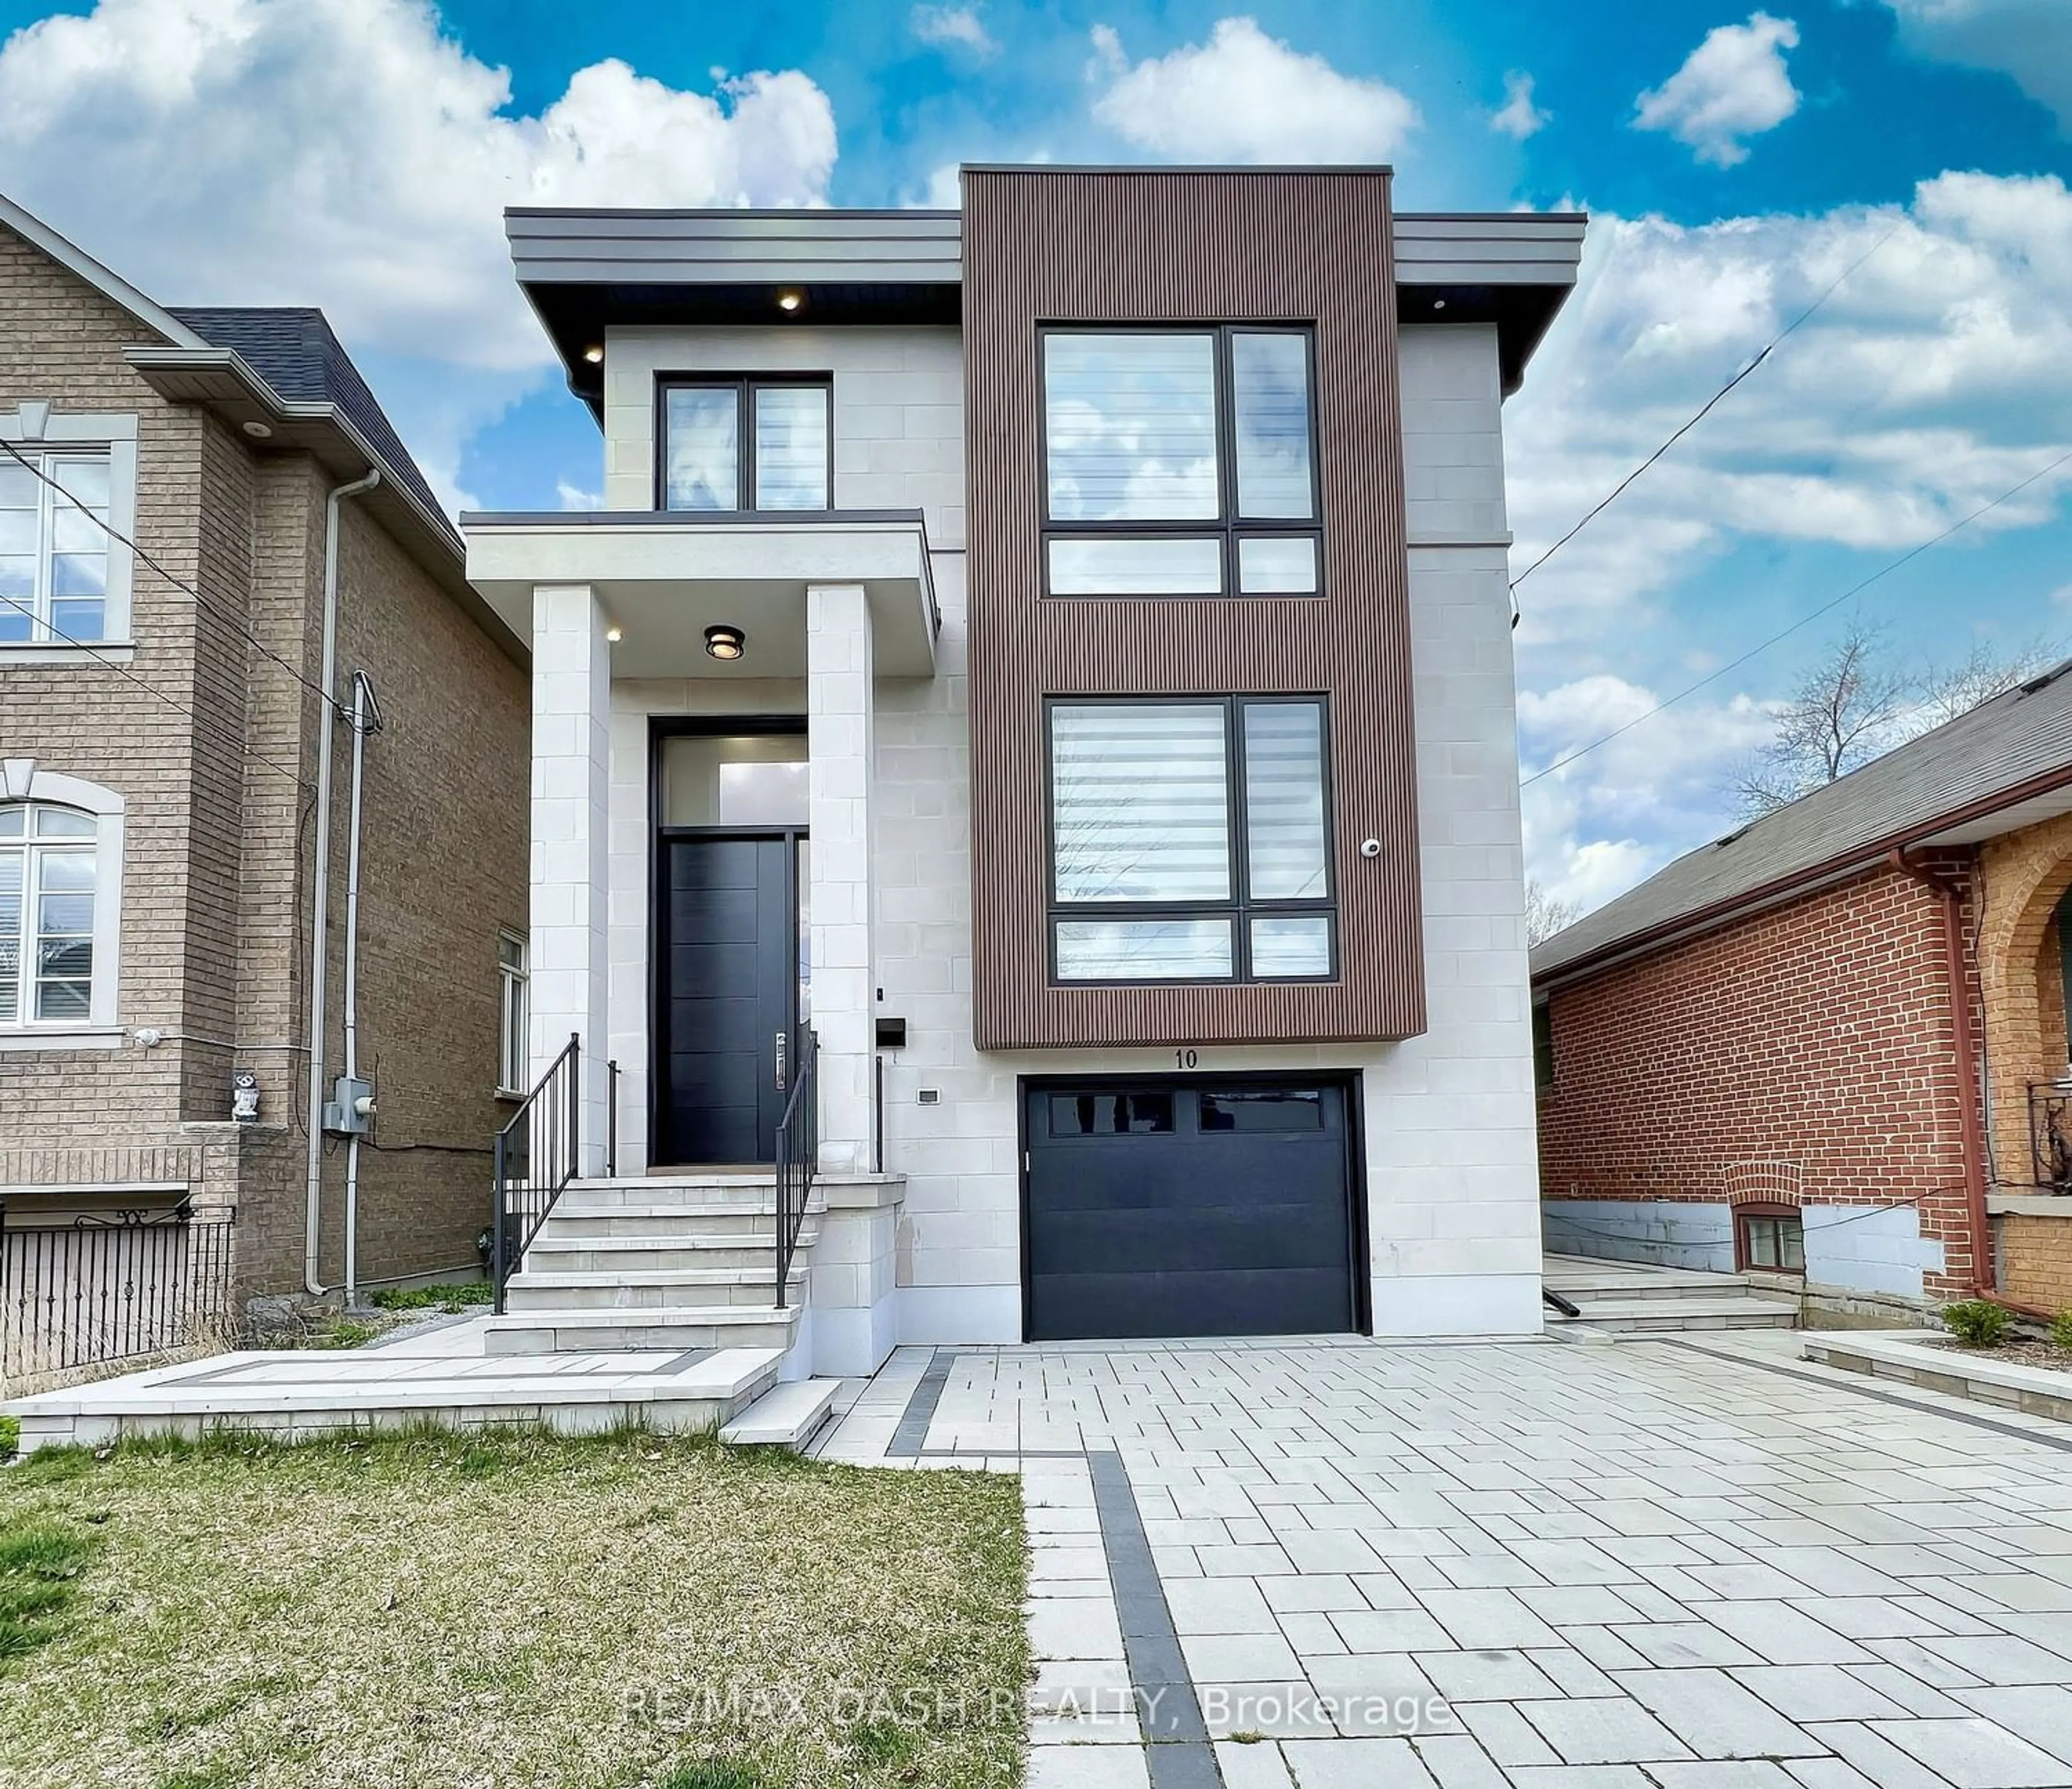 Home with brick exterior material for 10 Sultana Ave, Toronto Ontario M6A 1T4